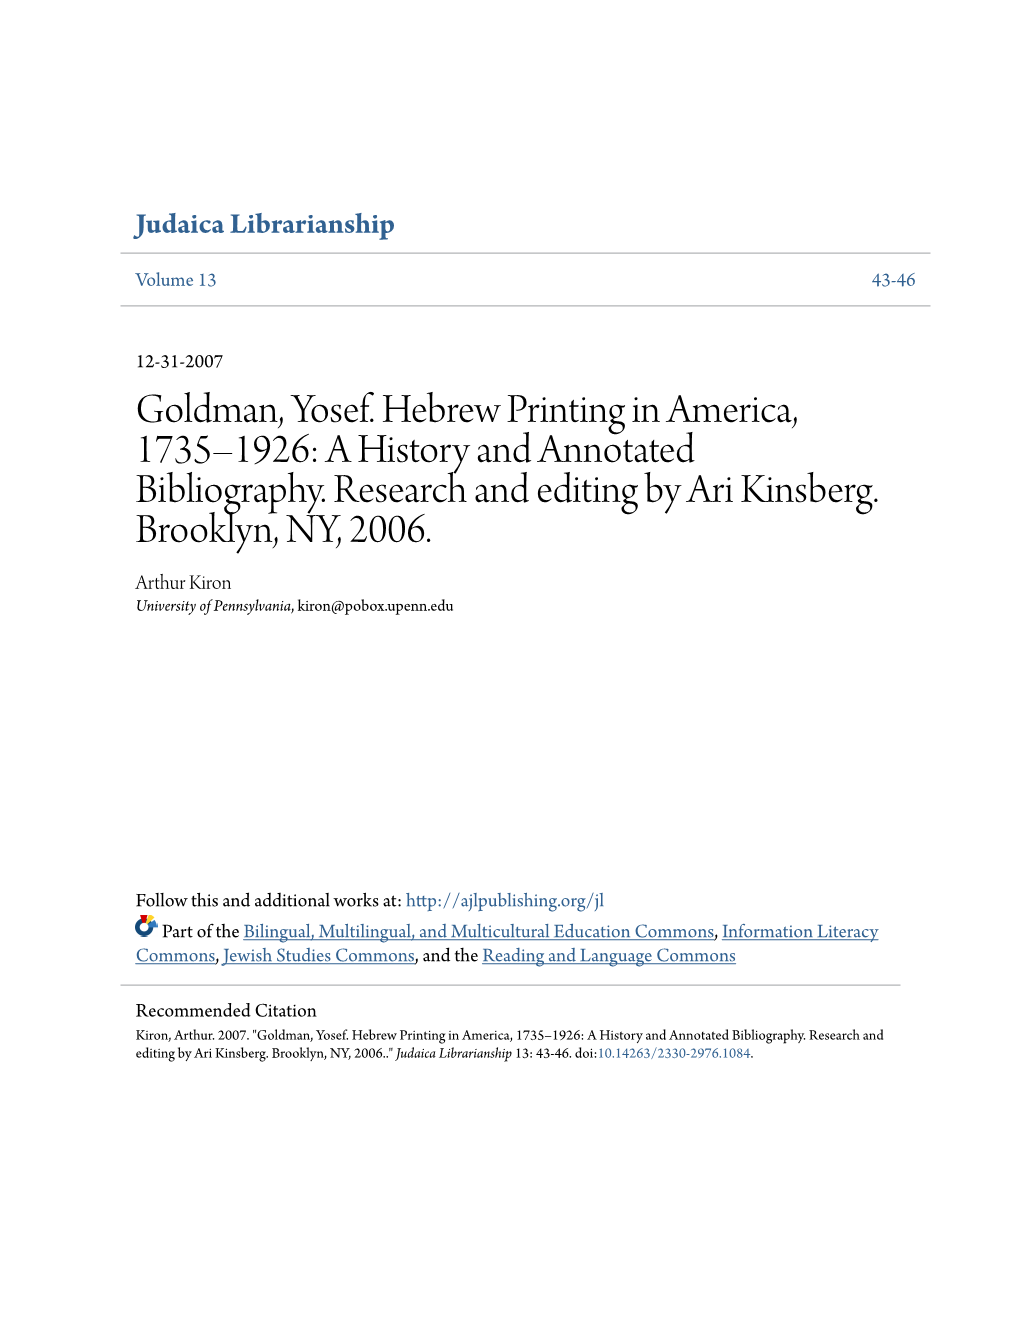 Goldman, Yosef. Hebrew Printing in America, 1735–1926: a History and Annotated Bibliography